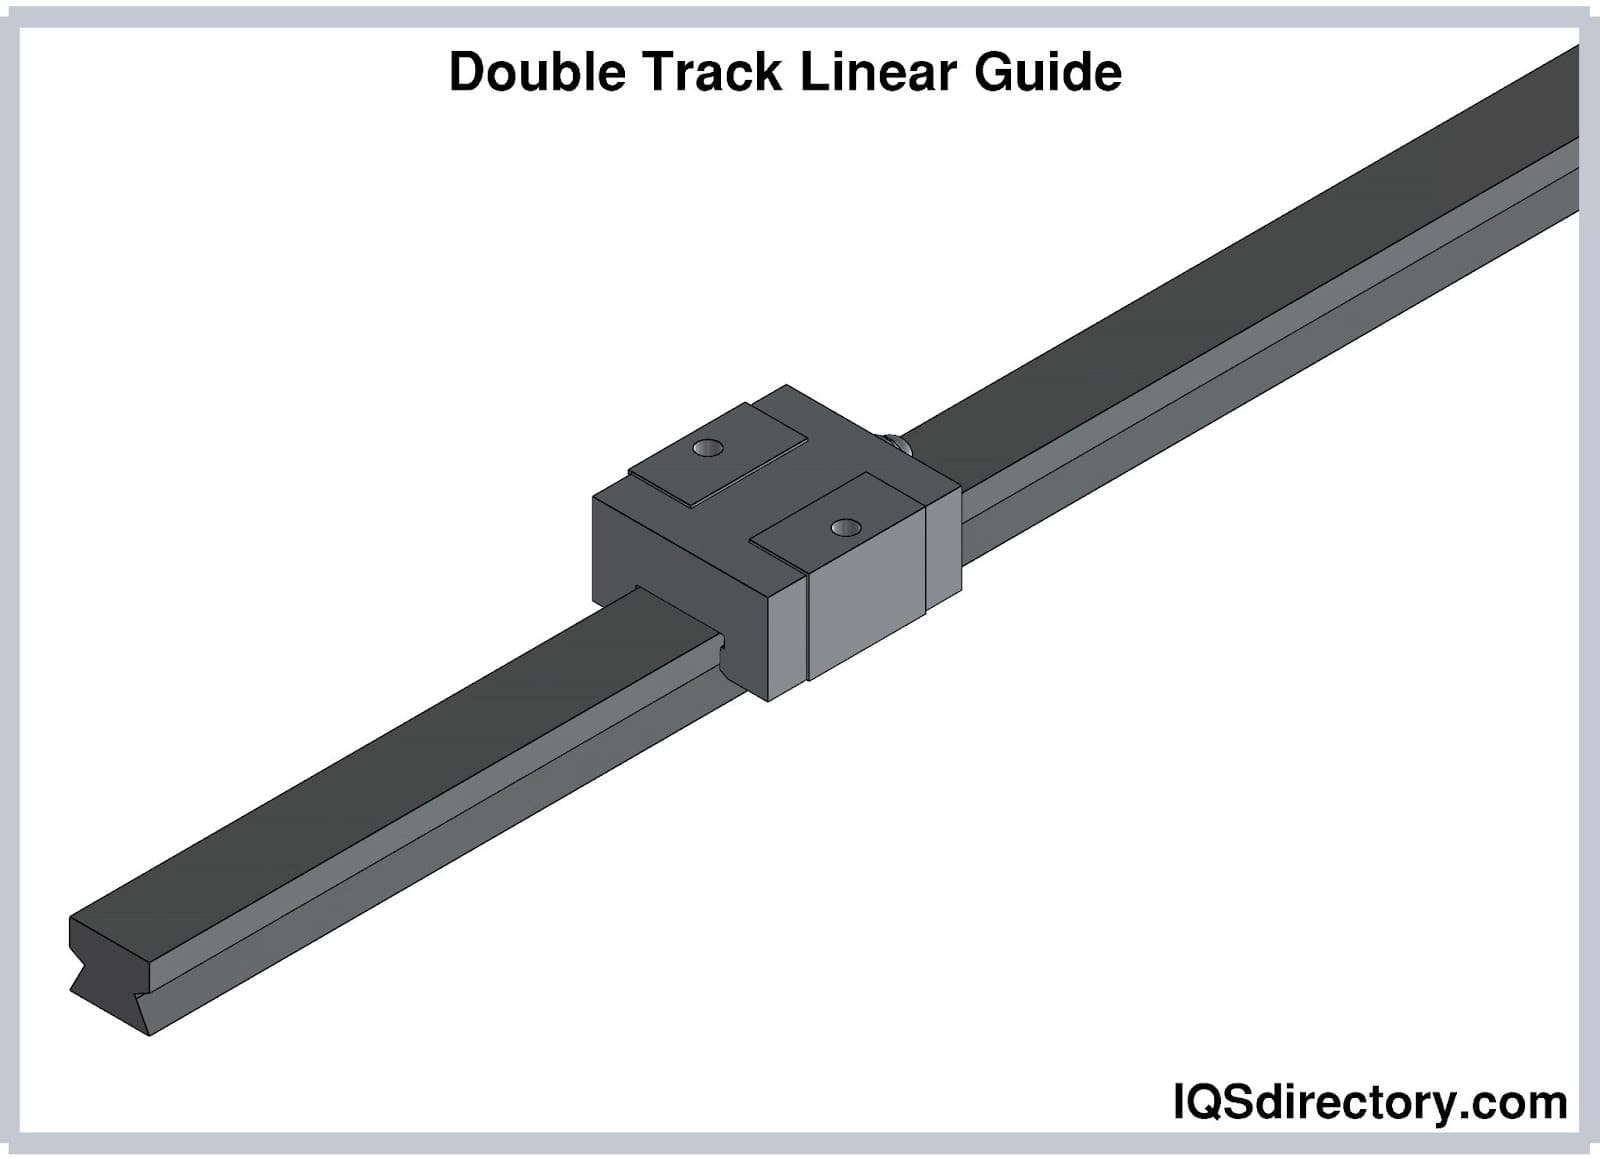 Double Track Linear Guide